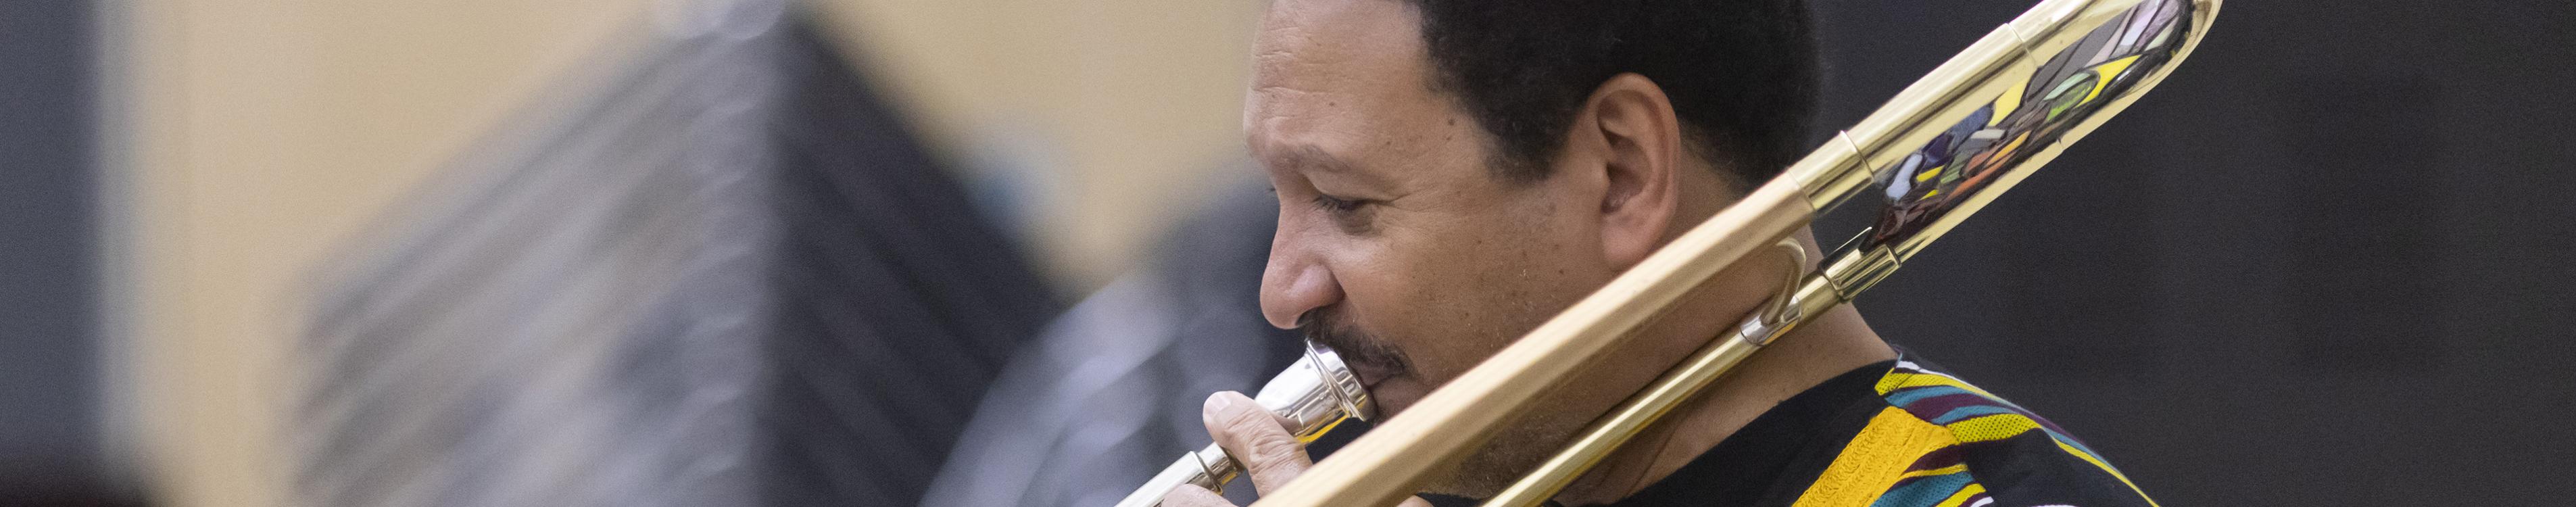 Jazz legend Delfeayo Marsalis plays trombone during rehearsal with the Puget Sound Jazz Orchestra